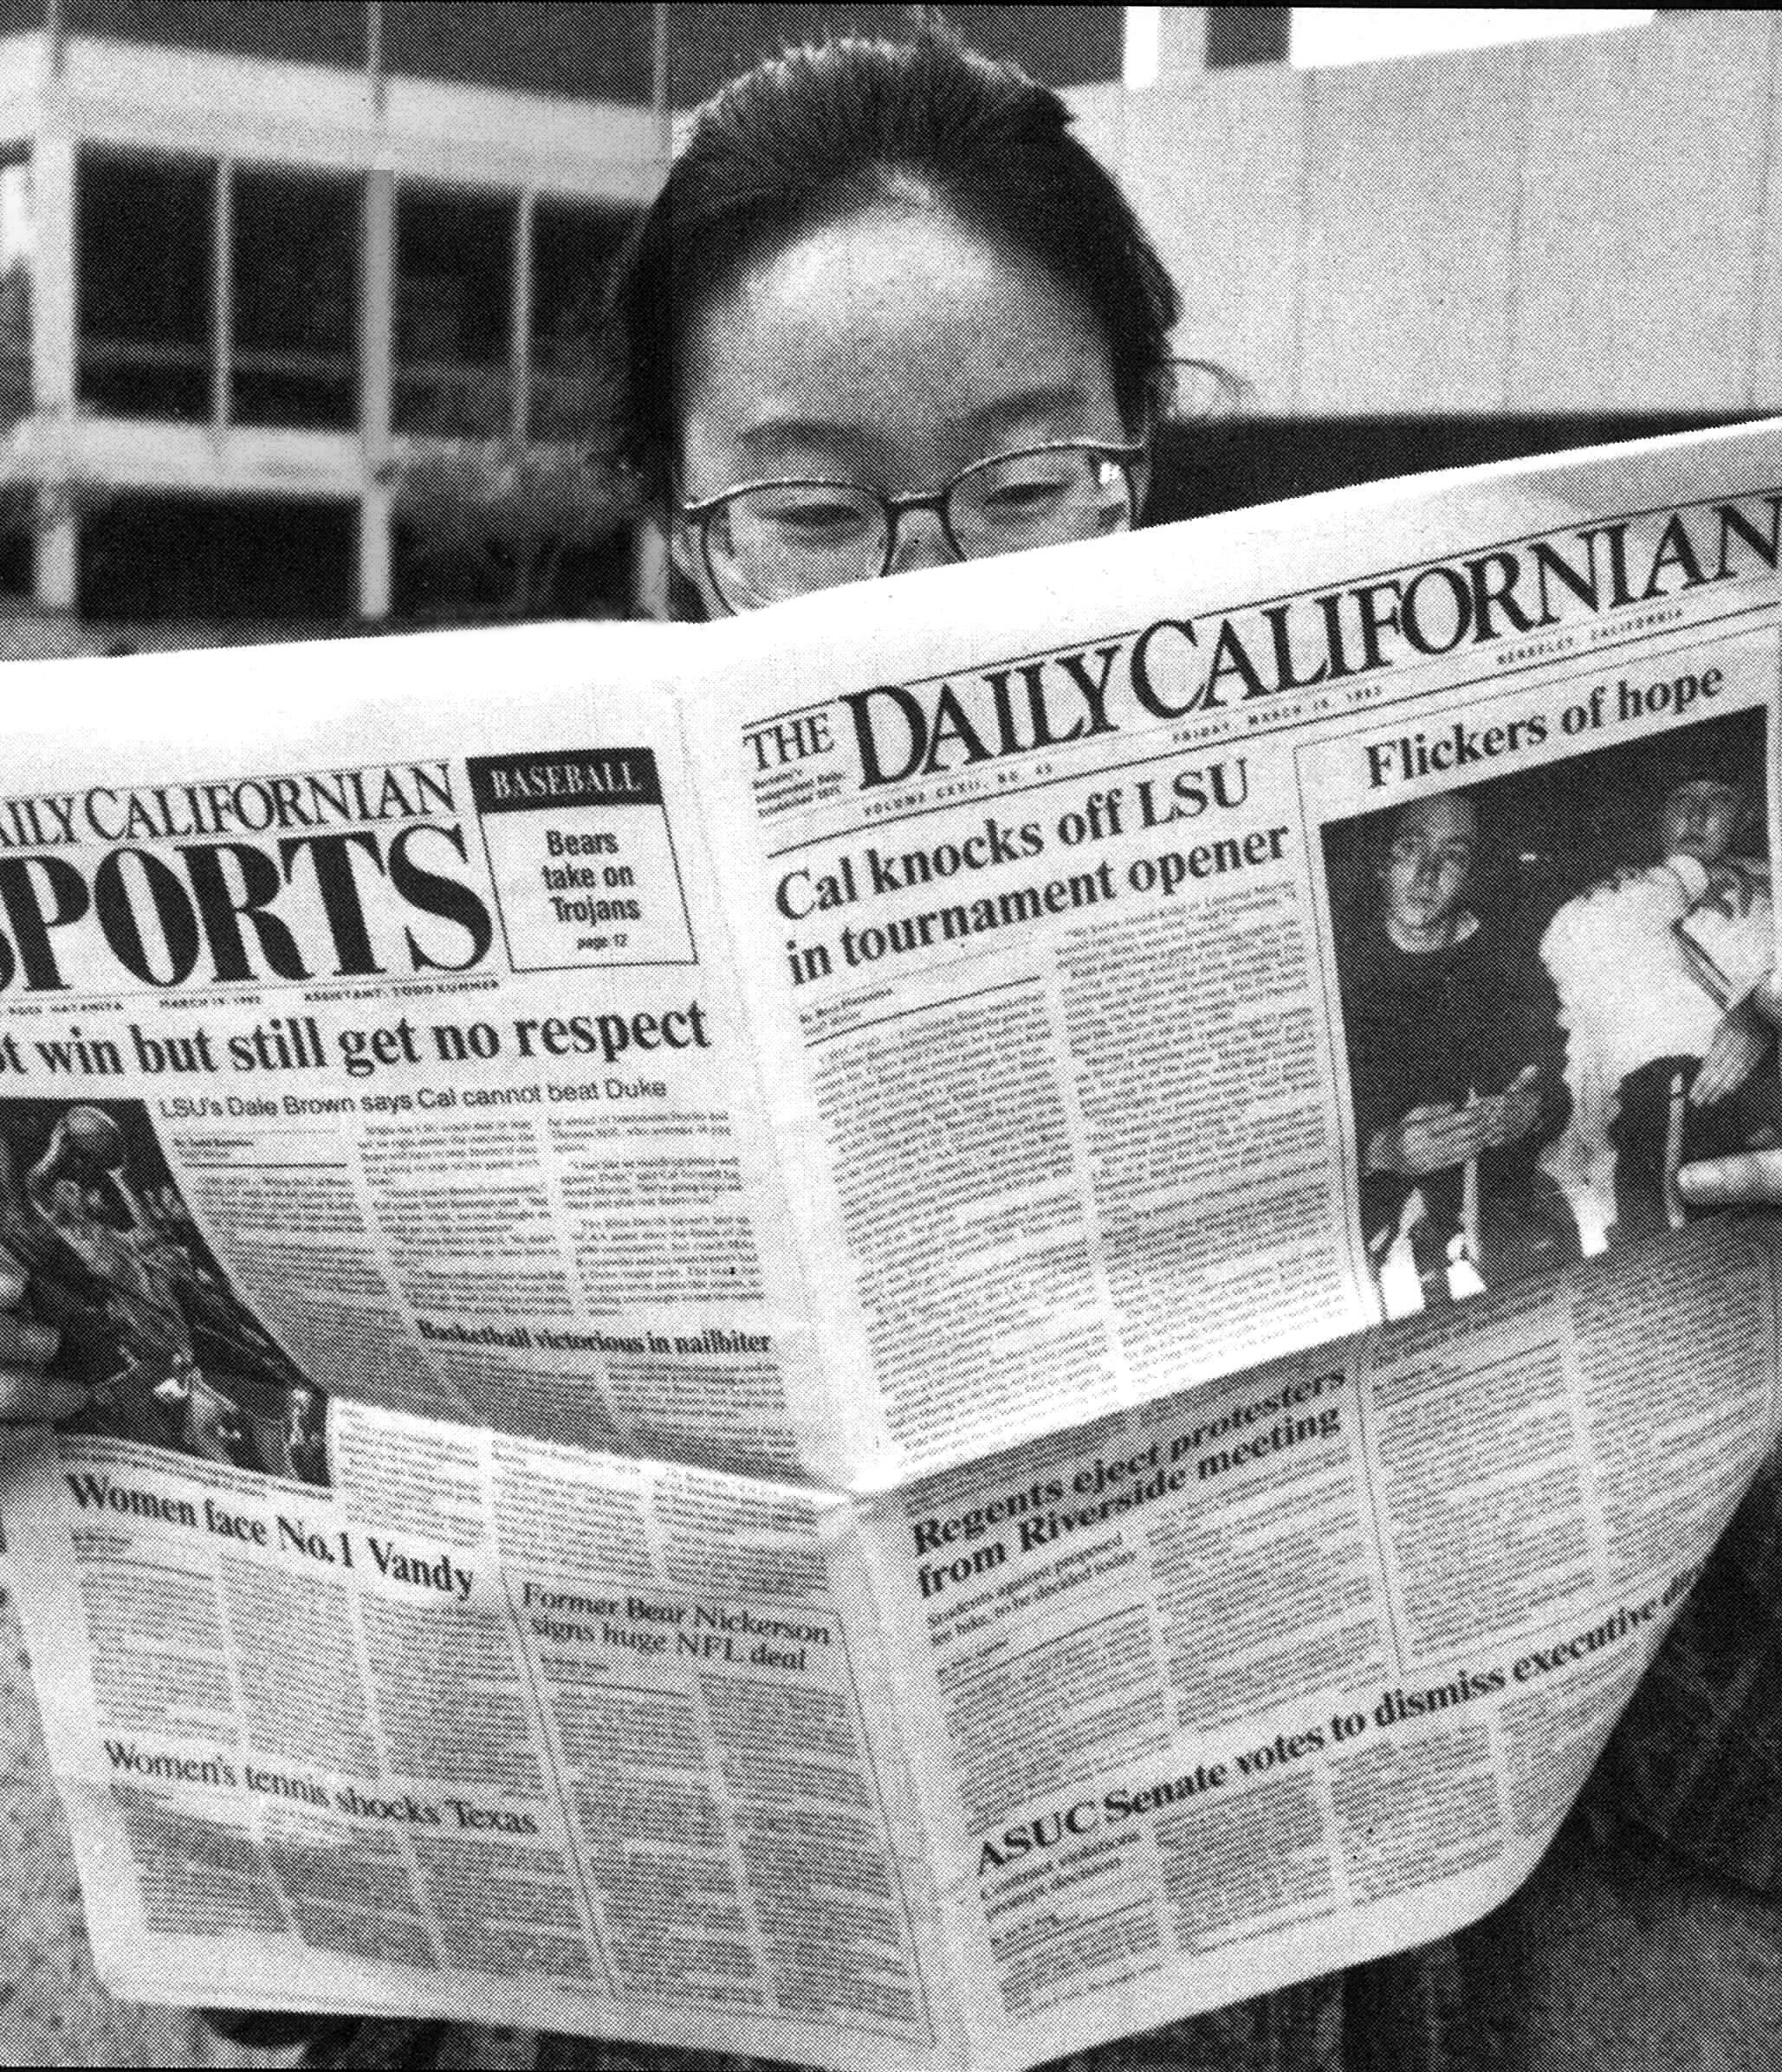 Black and white photo of a student poring over a copy of the newspaper.